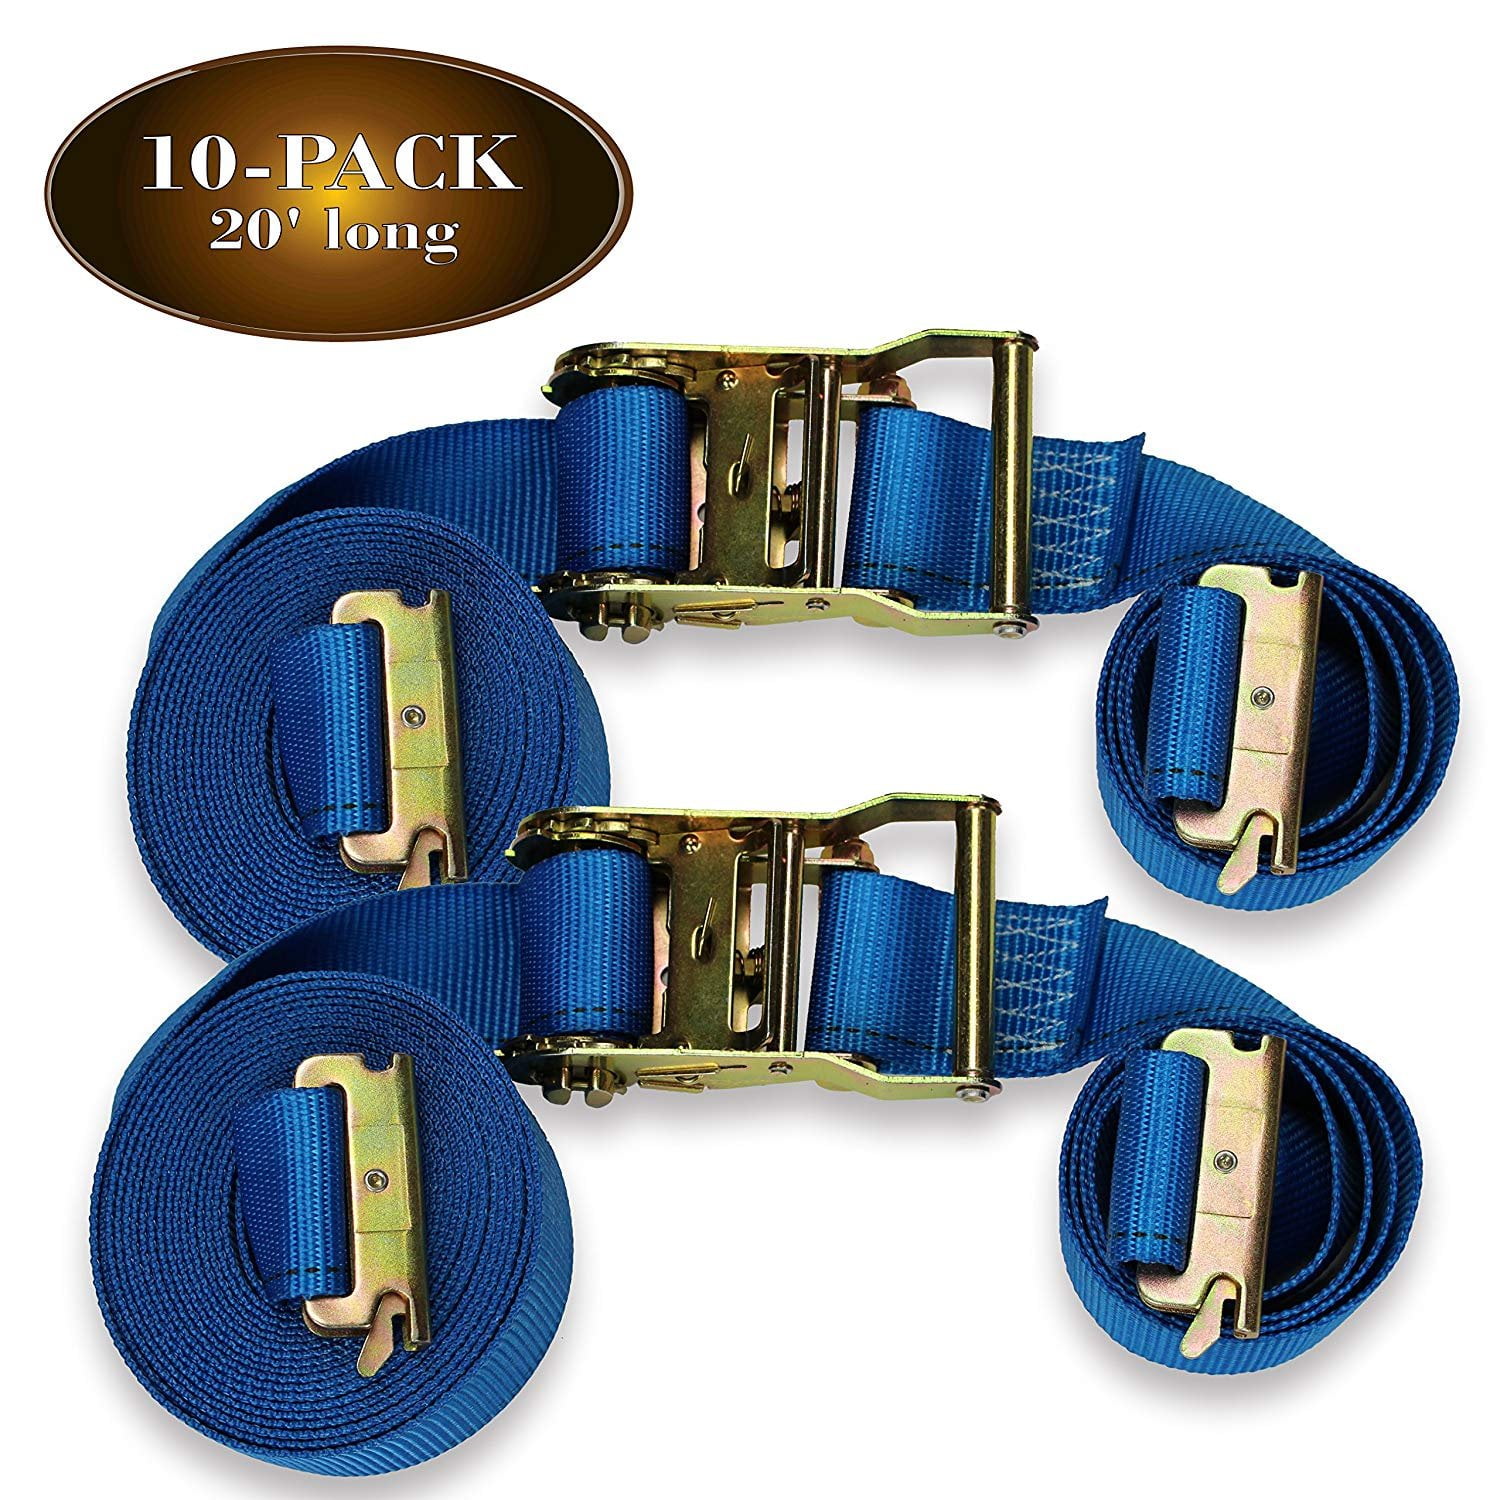 NEW 10 Heavy Duty Buckles Camping Storage Hauling Tiedowns Crafts 10 New buckles 